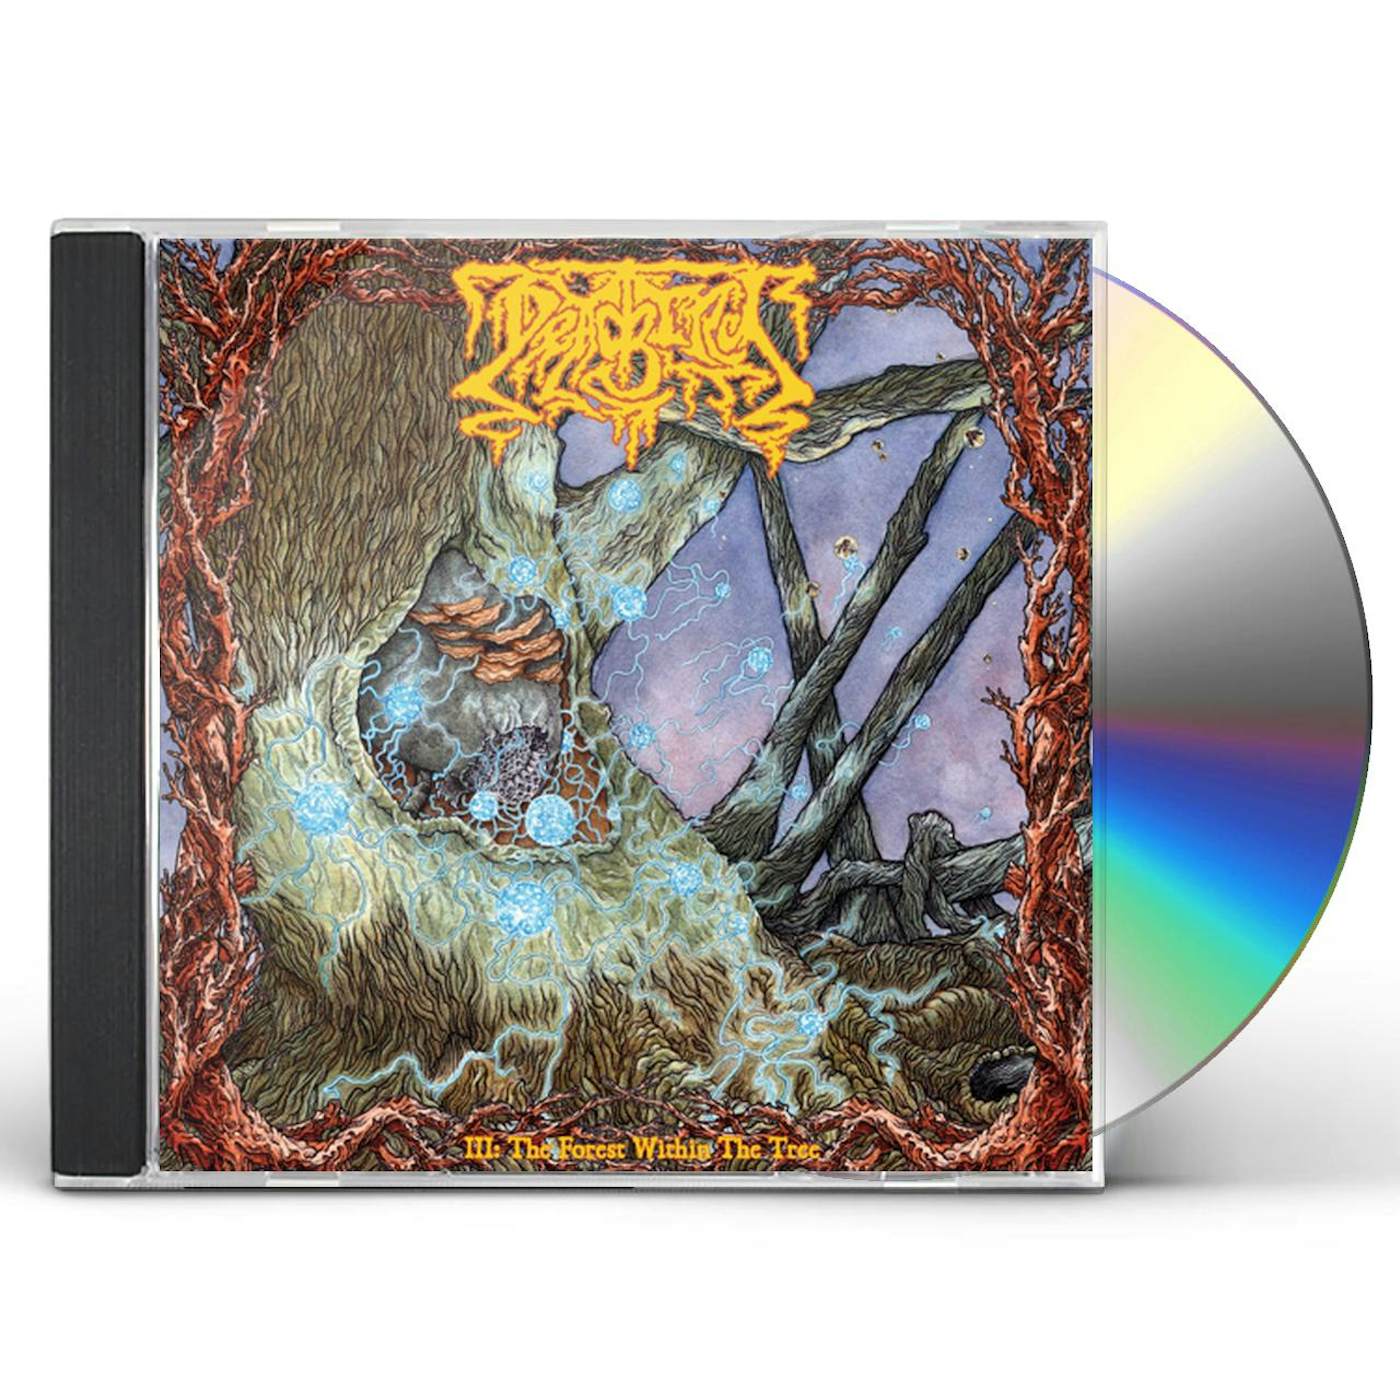 Deadbird III: THE FOREST WITHIN THE TREE CD